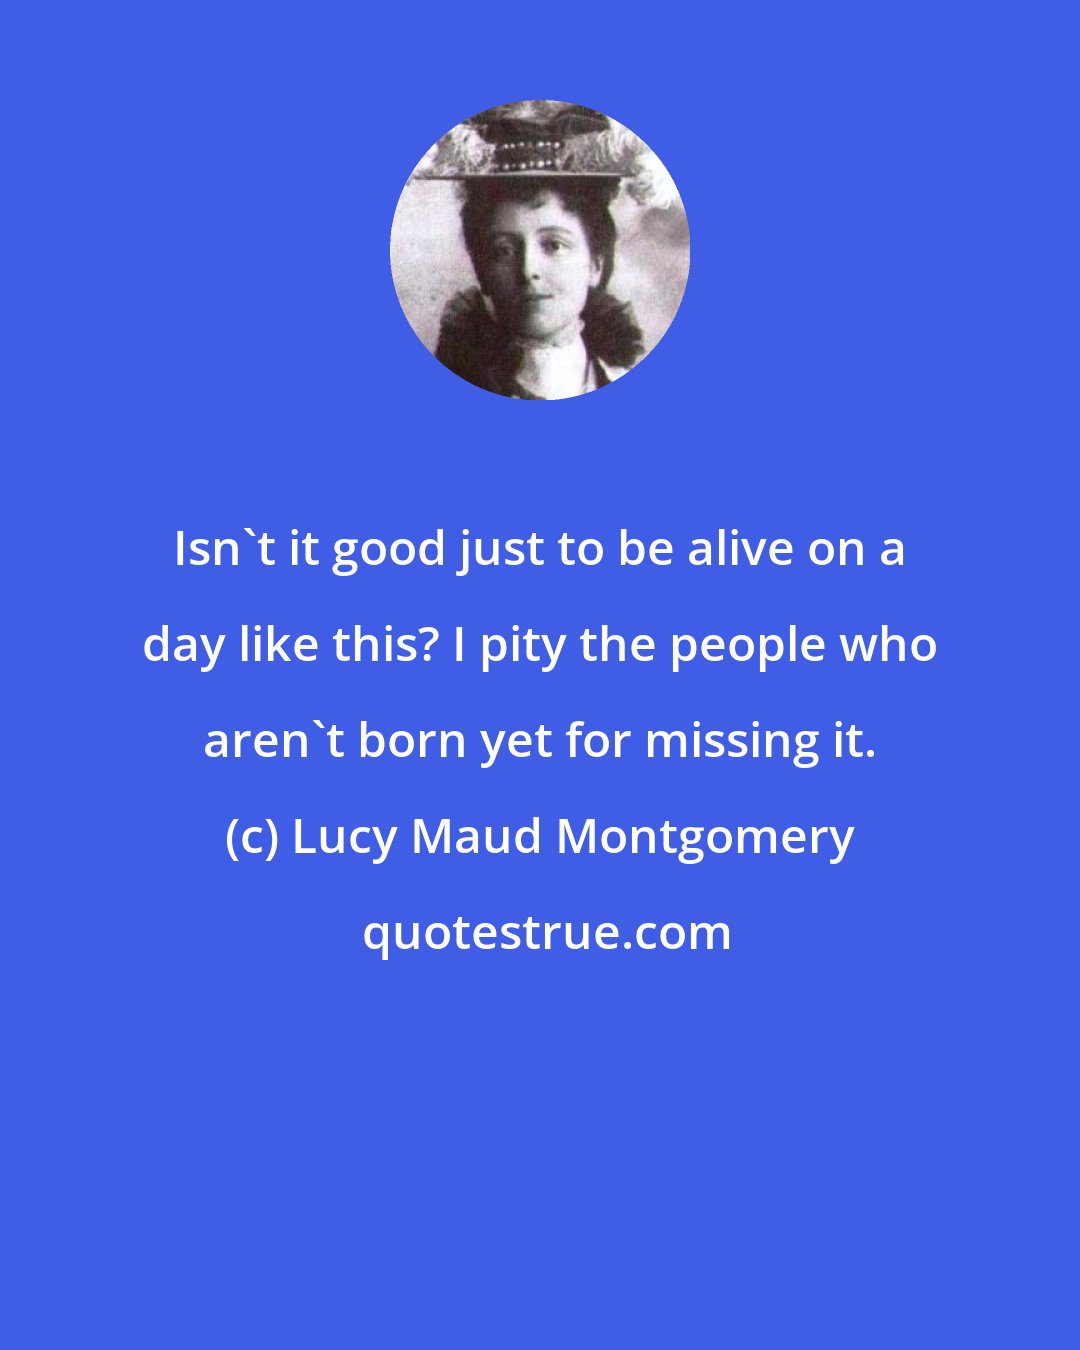 Lucy Maud Montgomery: Isn't it good just to be alive on a day like this? I pity the people who aren't born yet for missing it.